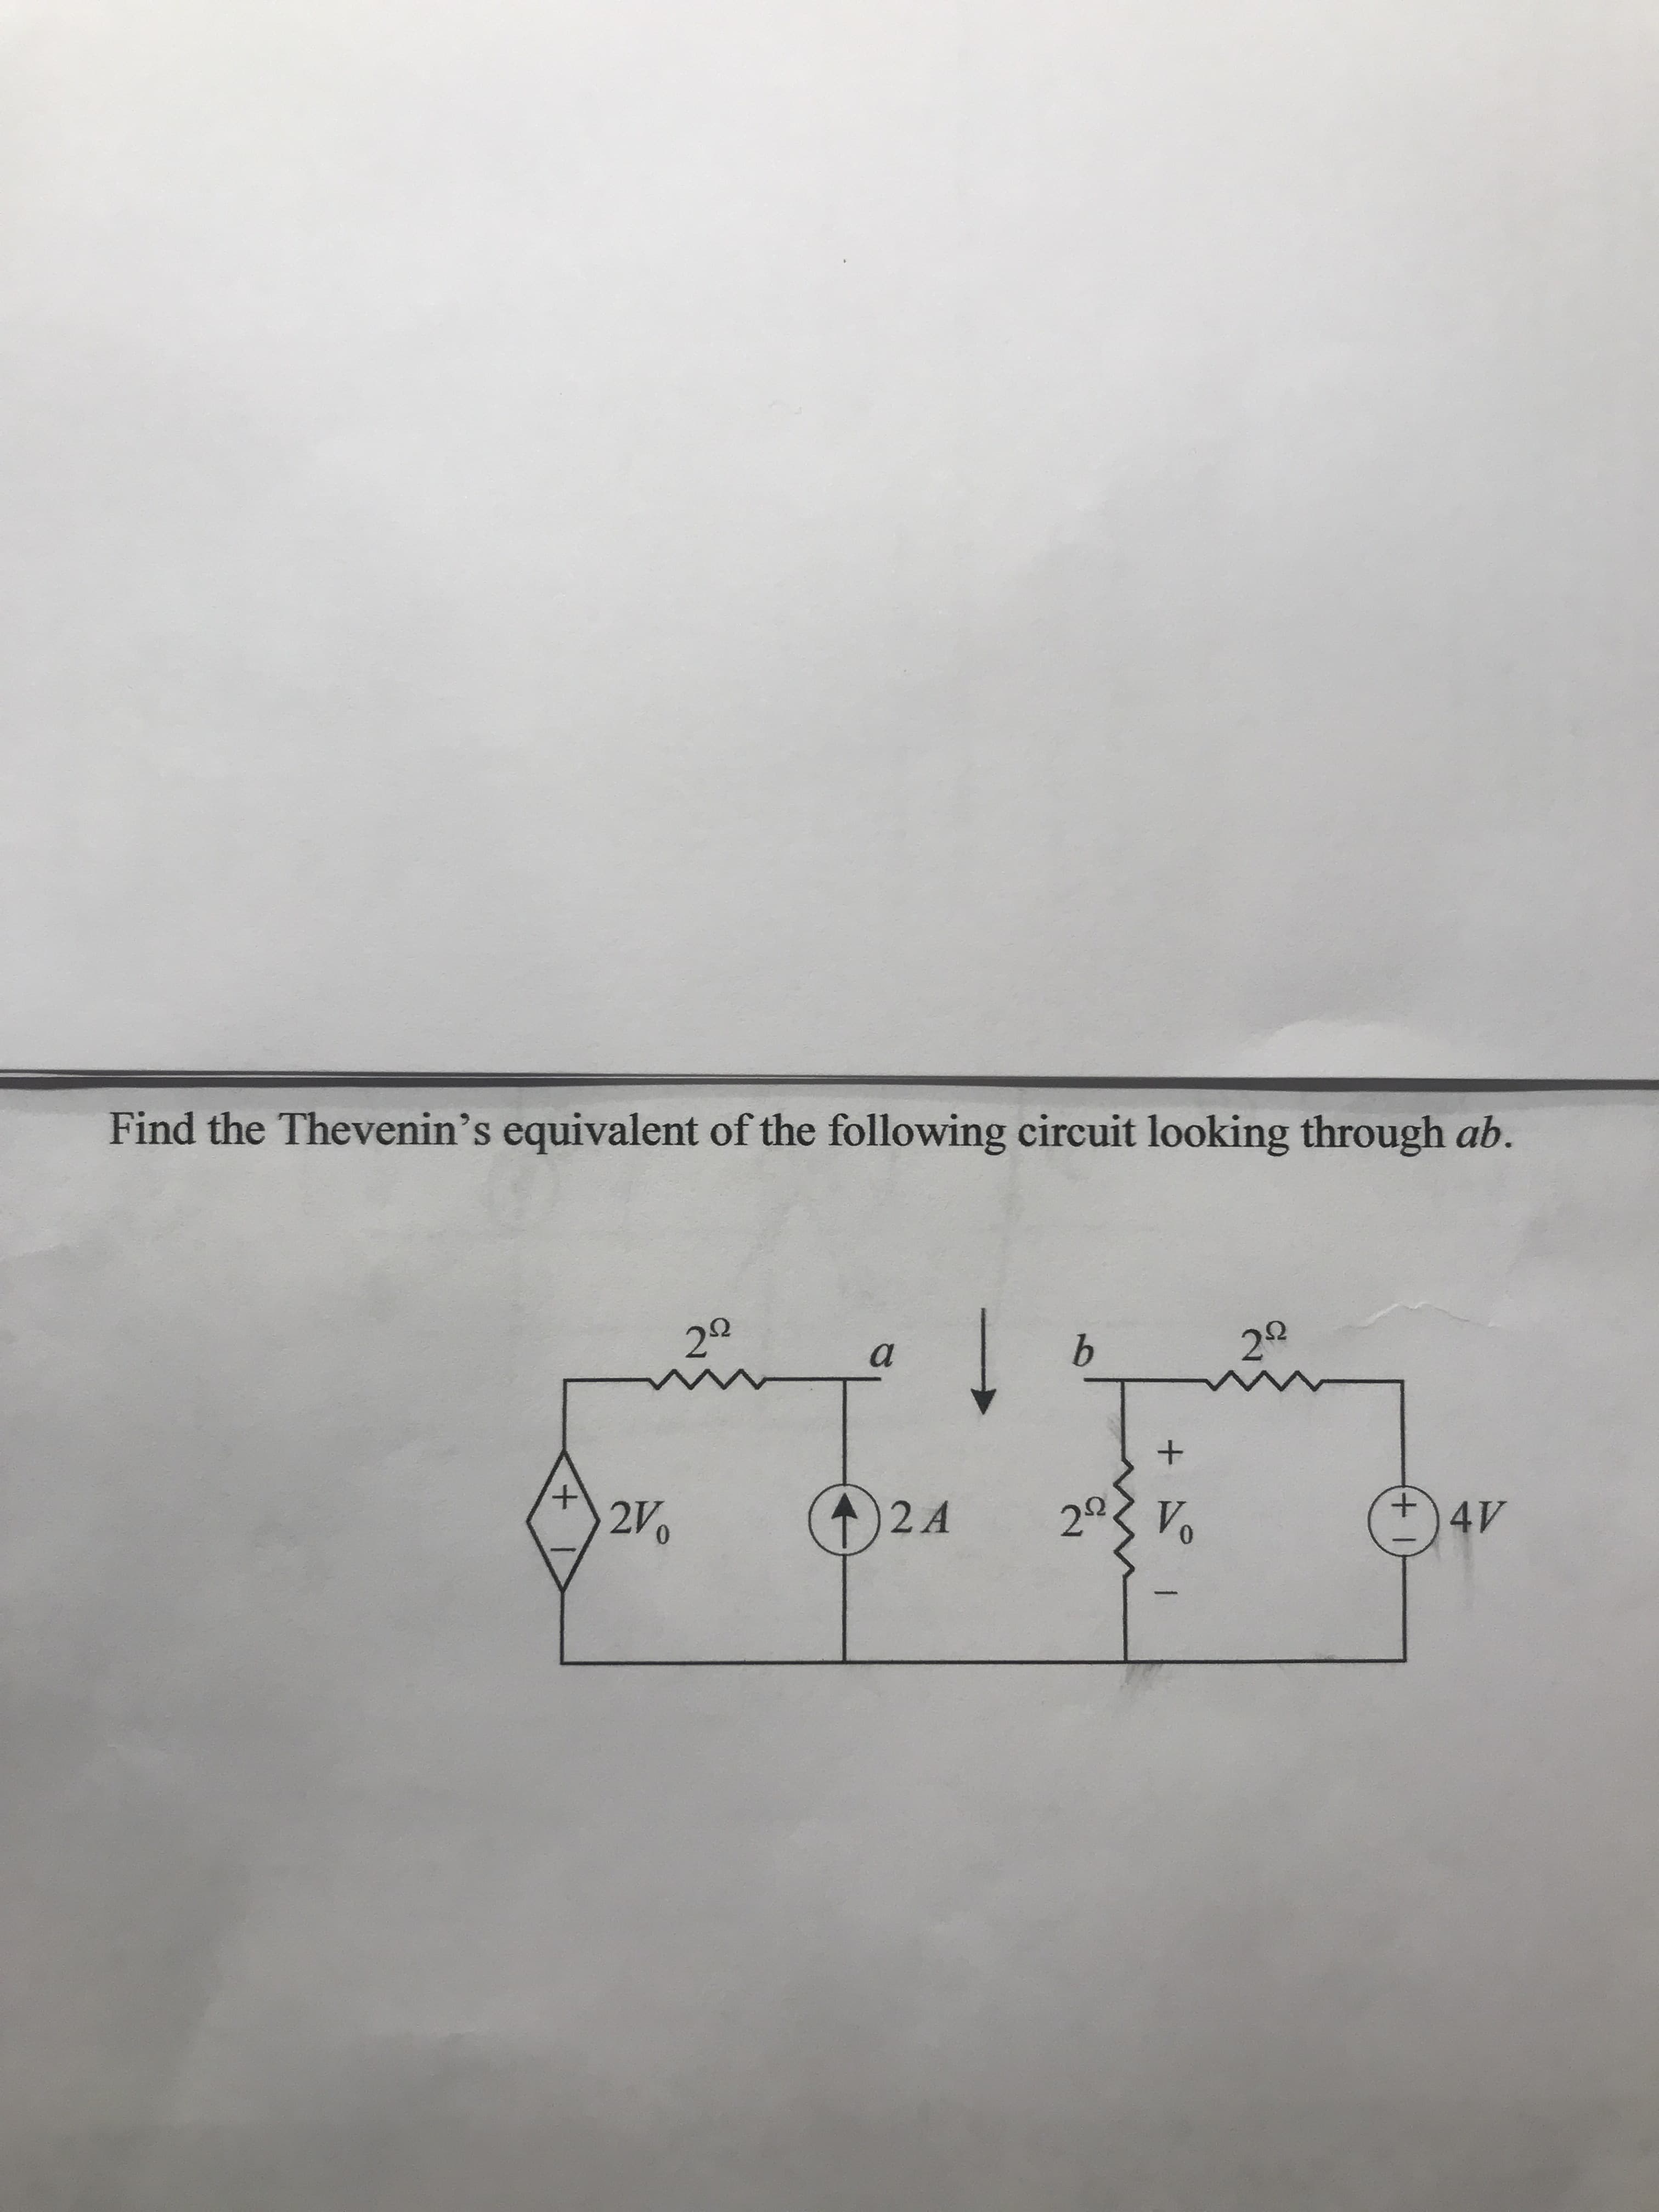 Find the Thevenin's equivalent of the following circuit looking through ab.
2Ω
2Ω
2 A
